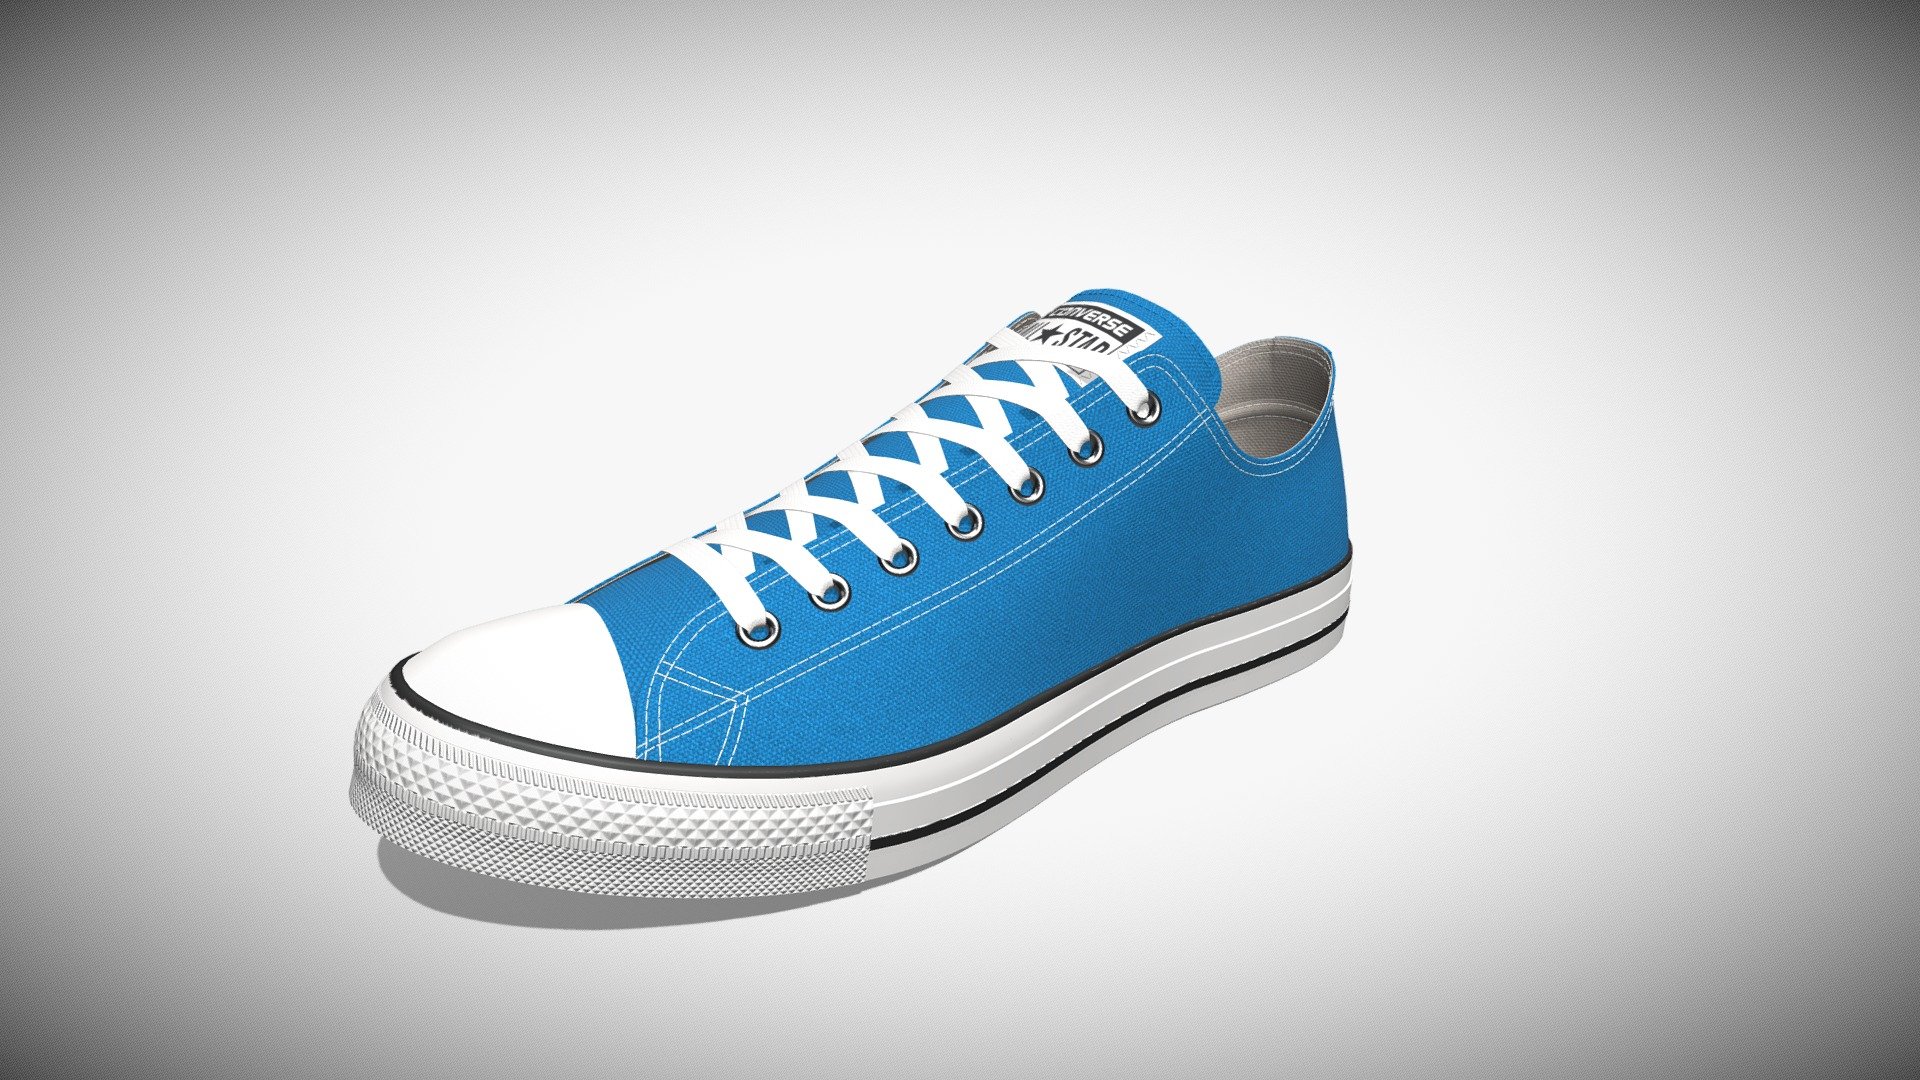 Detailed 3D model of a pair of blue Chuck Taylor All Star Classic Low Top sneakers, modeled in Cinema 4D. The model was created using approximate real world dimensions.

The model has 376,710 polys and 393,354 vertices.

An additional file has been provided containing the original Cinema 4D project file with both standard and v-ray materials, textures and other 3d format such as 3ds, fbx and obj. These files contain both the left and right pair of the shoes 3d model